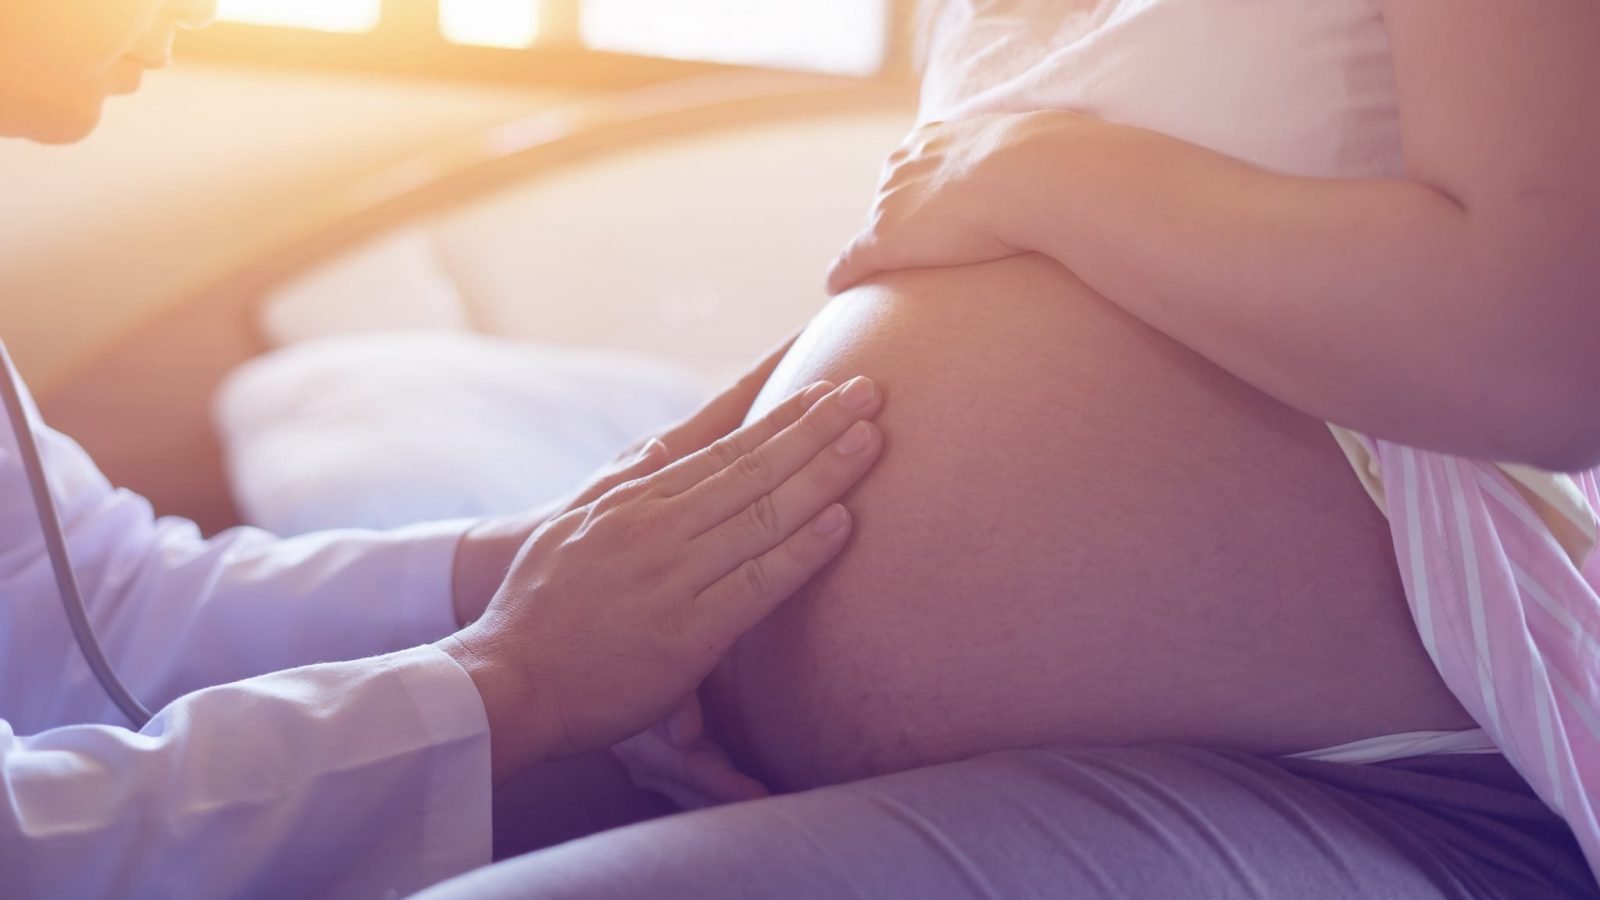 What To Do When You Find Out Your Baby is Breech